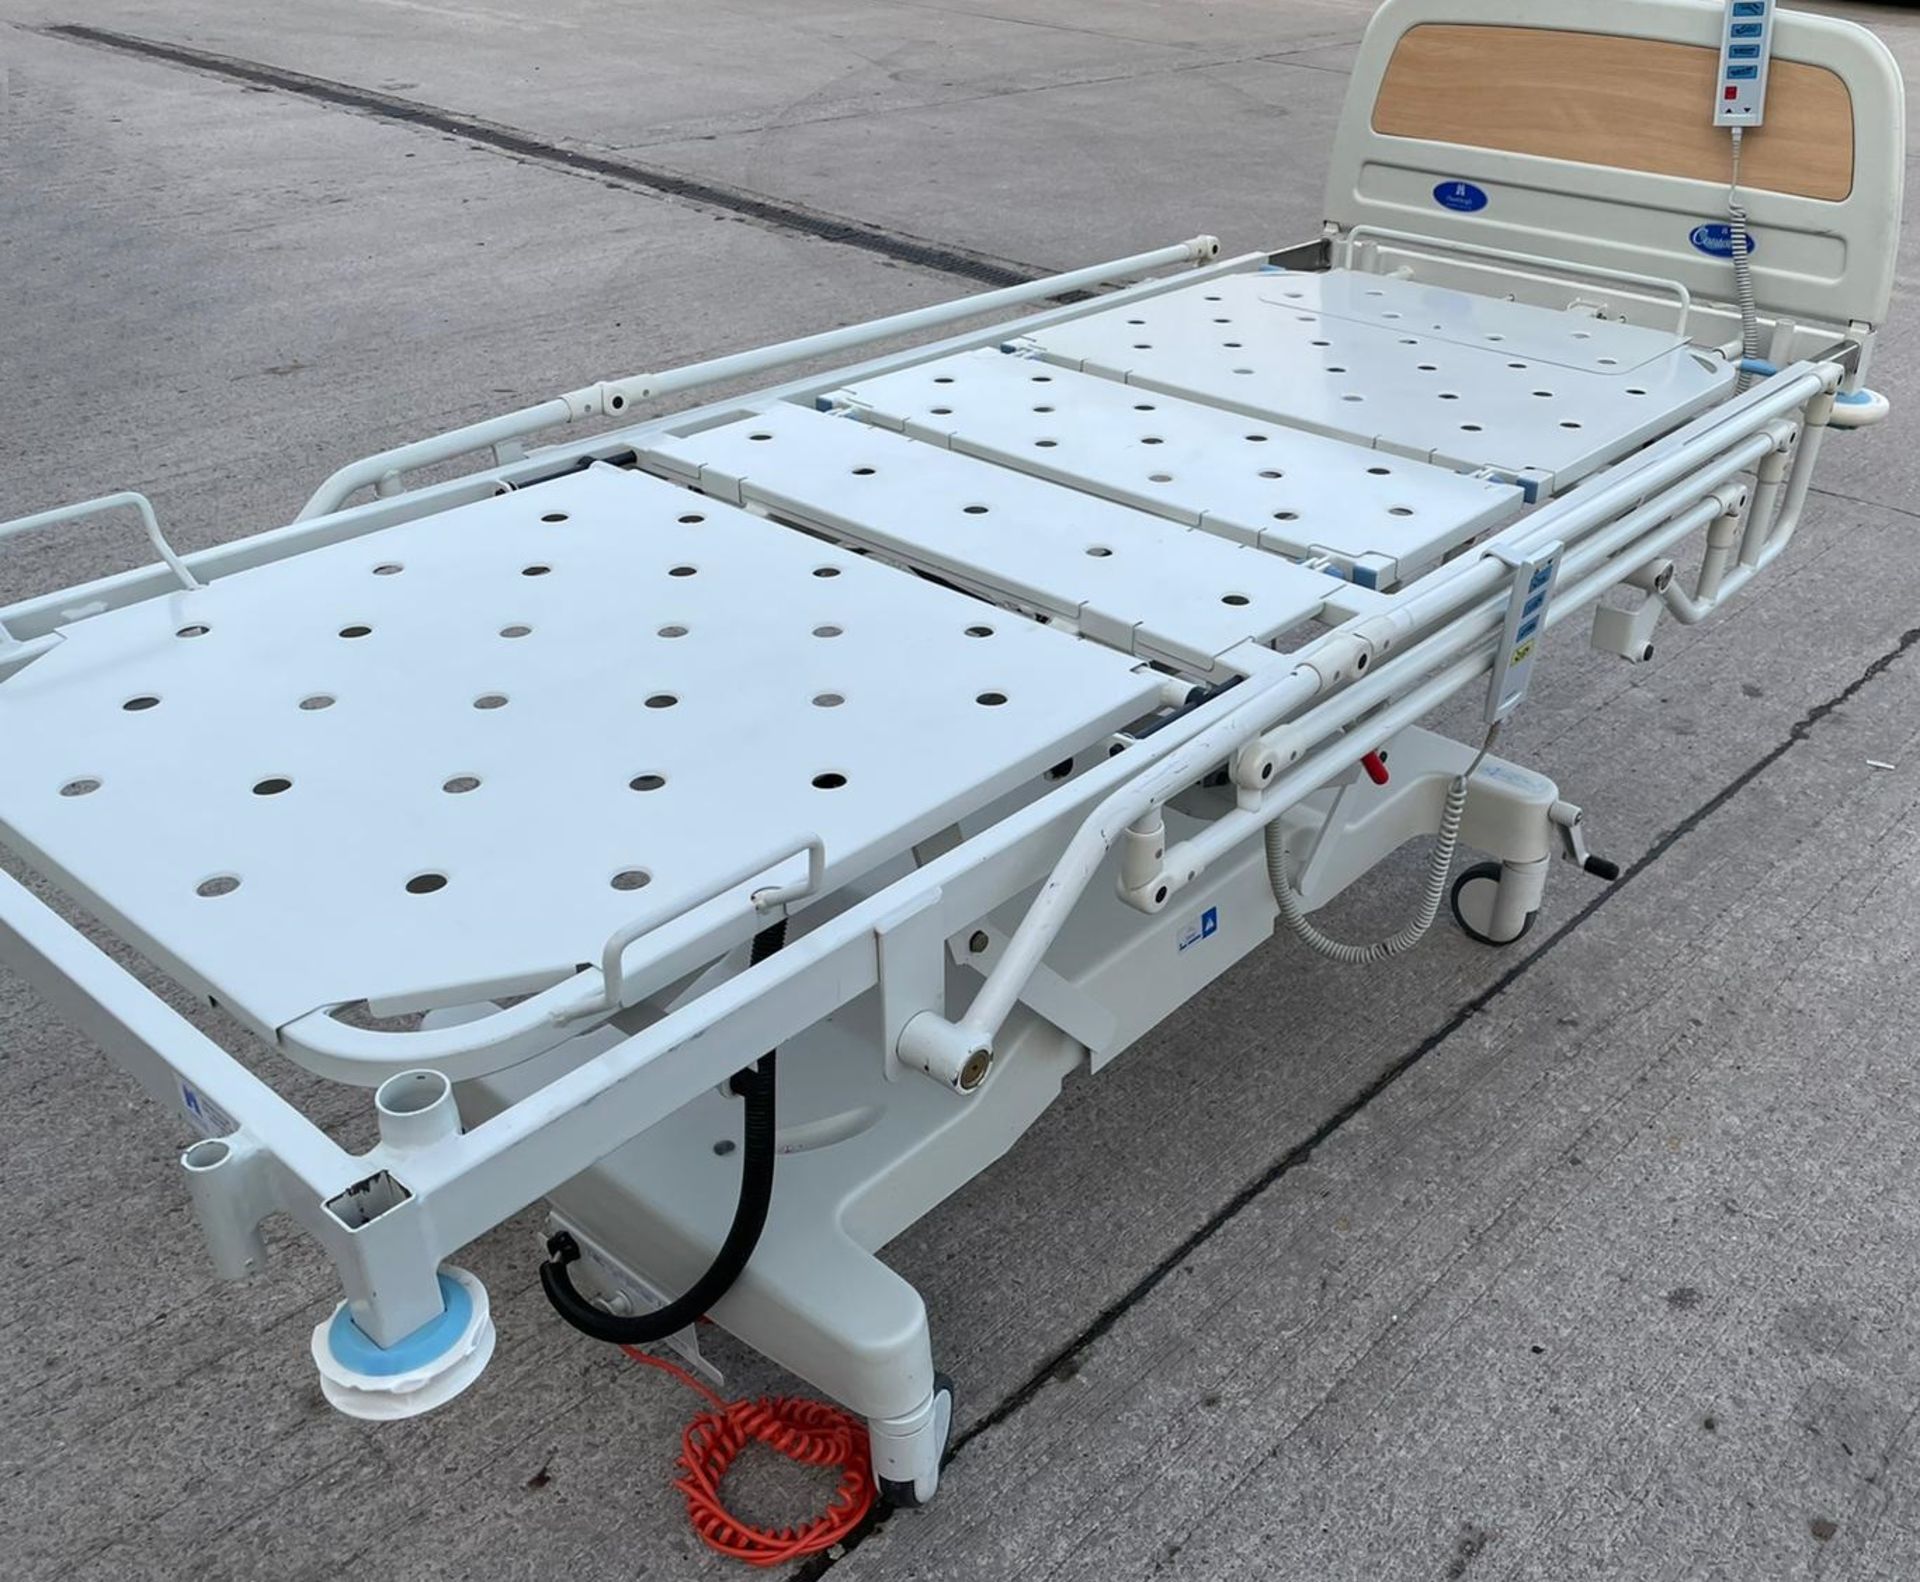 1 x Huntleigh CONTOURA Electric Hospital Bed - Features Rise/Fall 3-Way Profiling, Side Rails, - Image 8 of 11